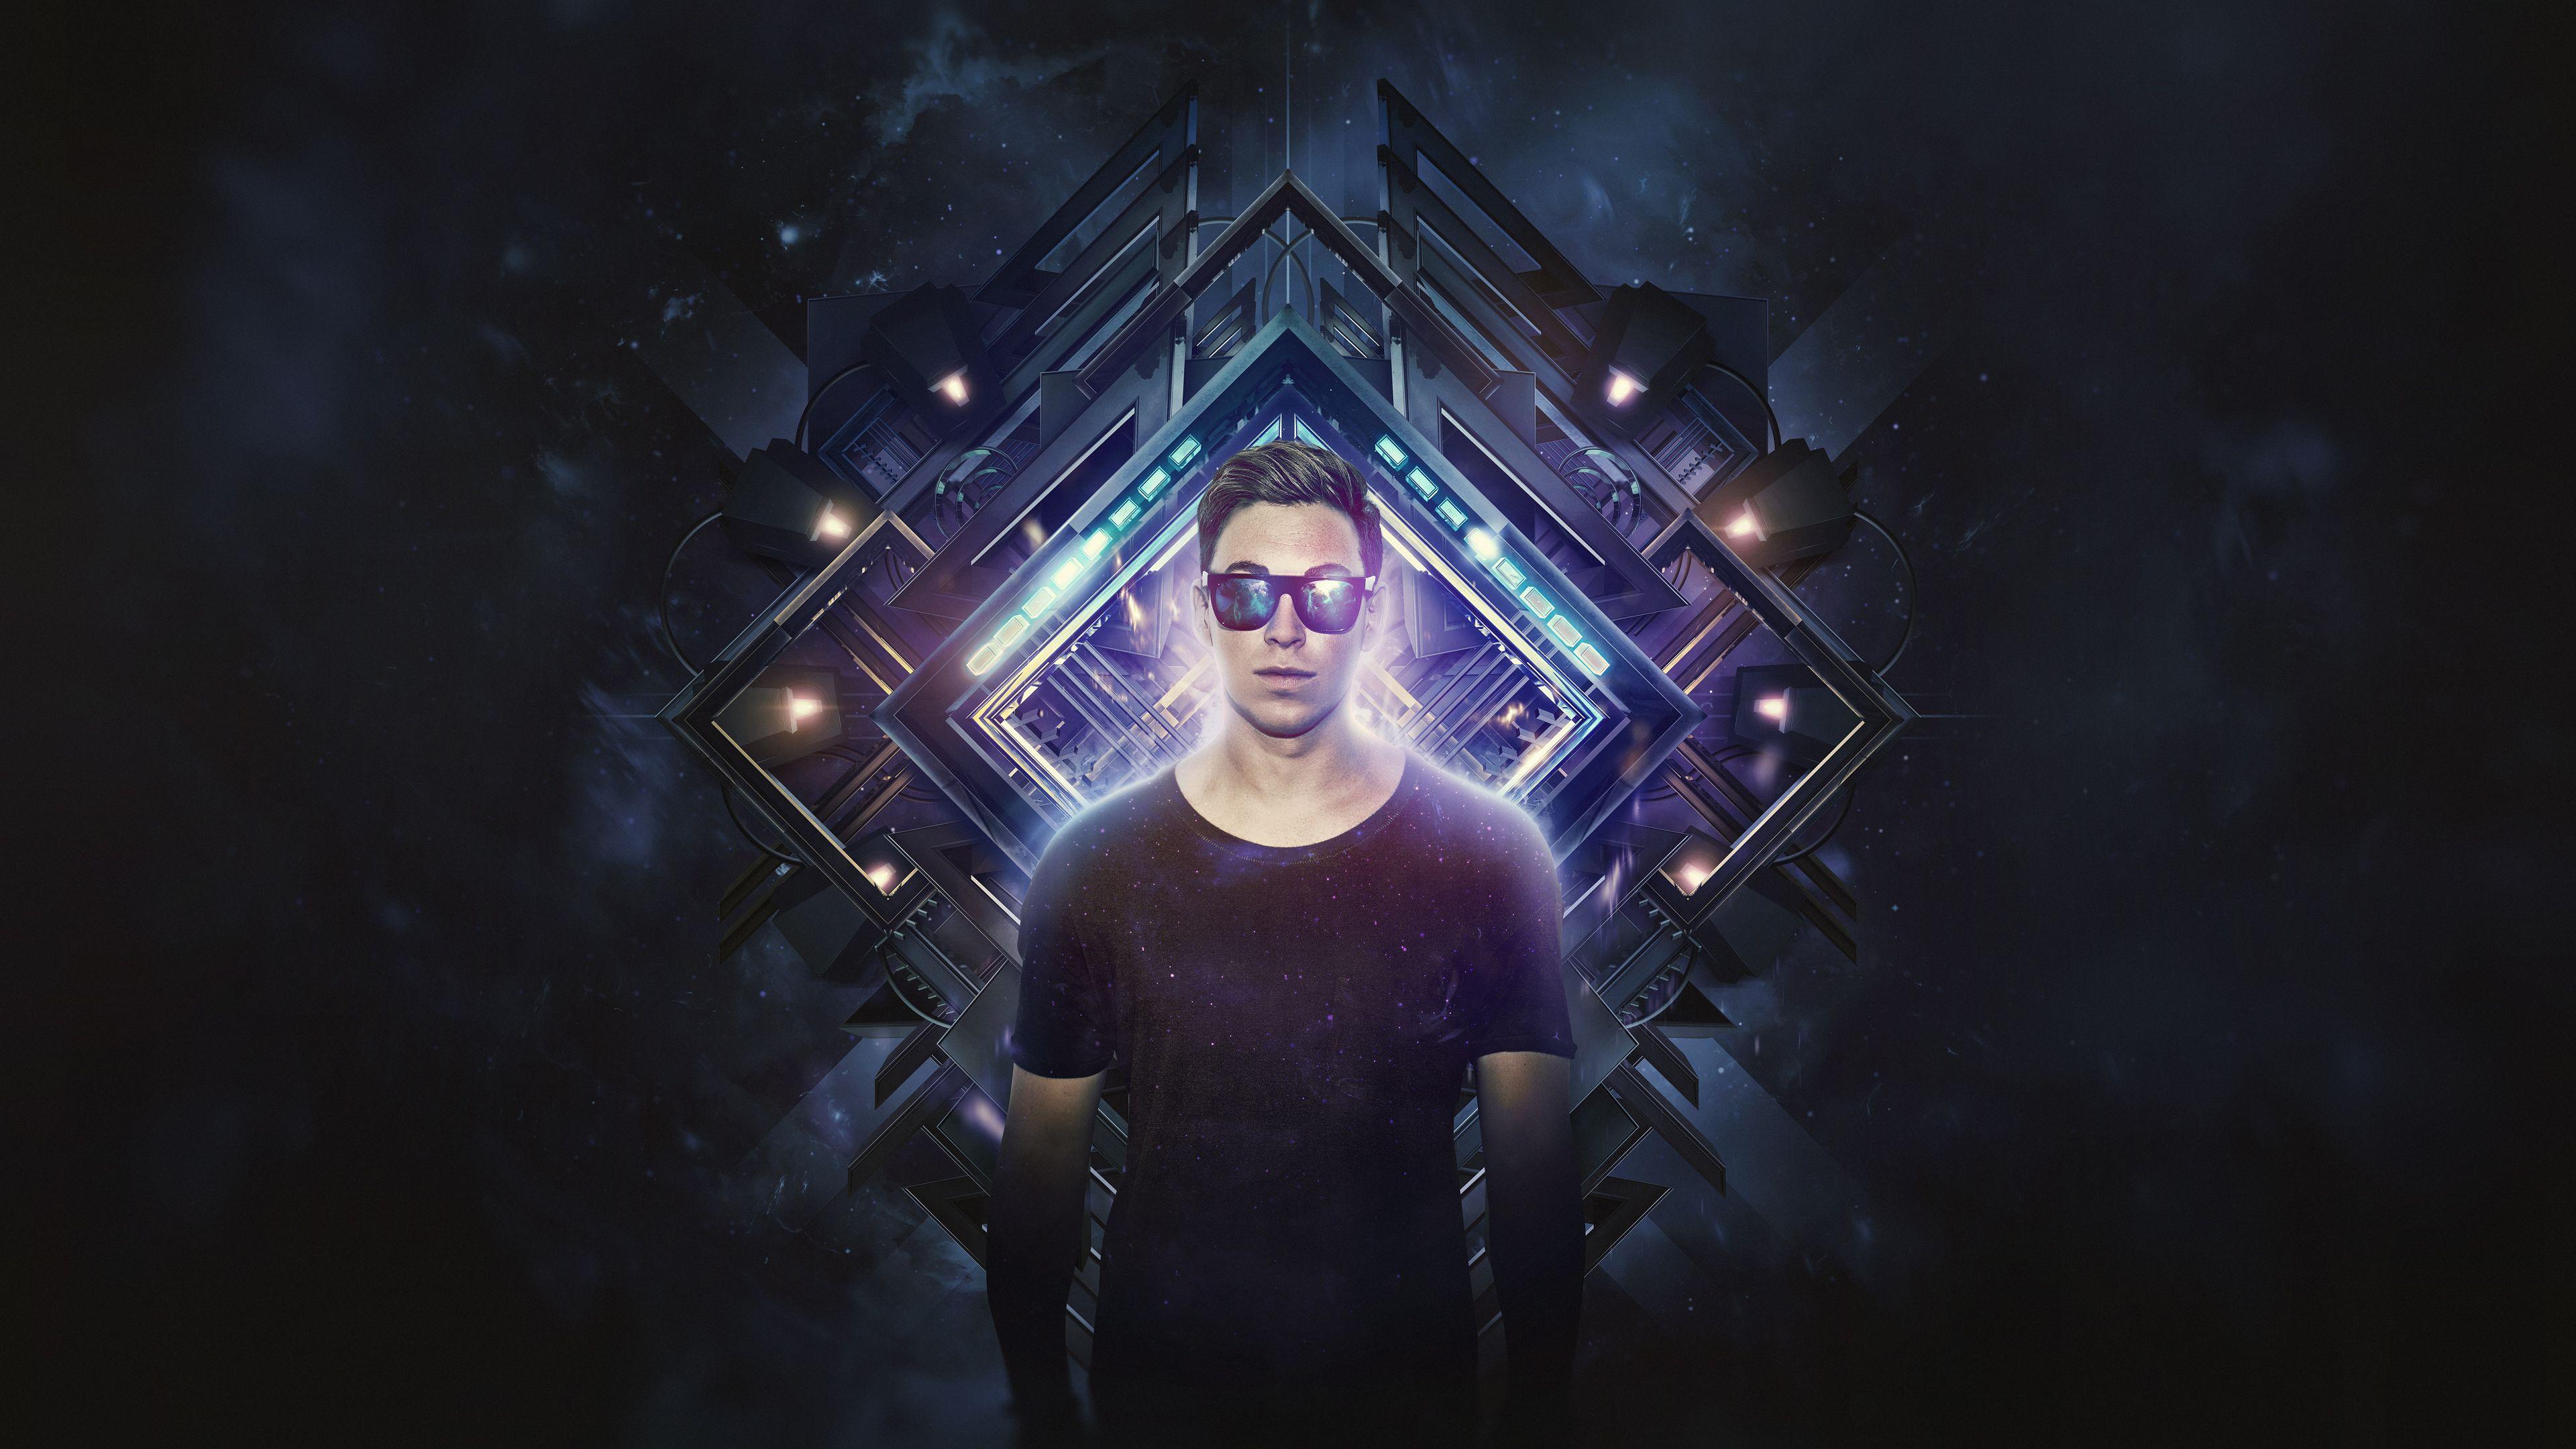 Hardwell Presents Revealed Volume 7 (Official Wallpaper) 4k Ultra HD